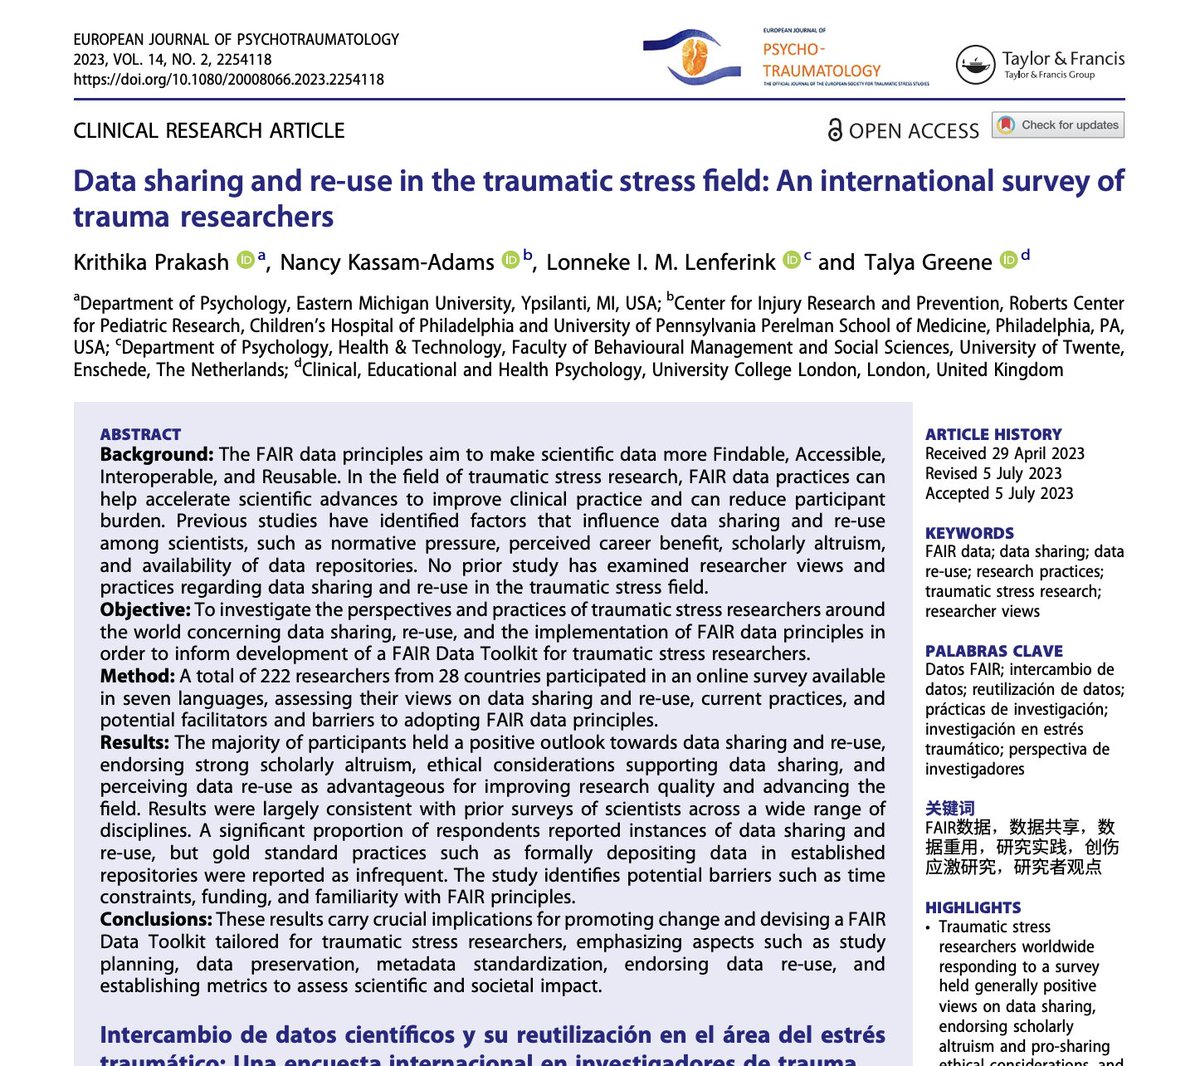 #Data sharing and re-use in the #traumatic stress field: An international survey of trauma researchers tandfonline.com/doi/full/10.10… => generally positive views on #datasharing, endorsing #scholarly altruism and pro-sharing ethical considerations, advancing the field... Any barriers?